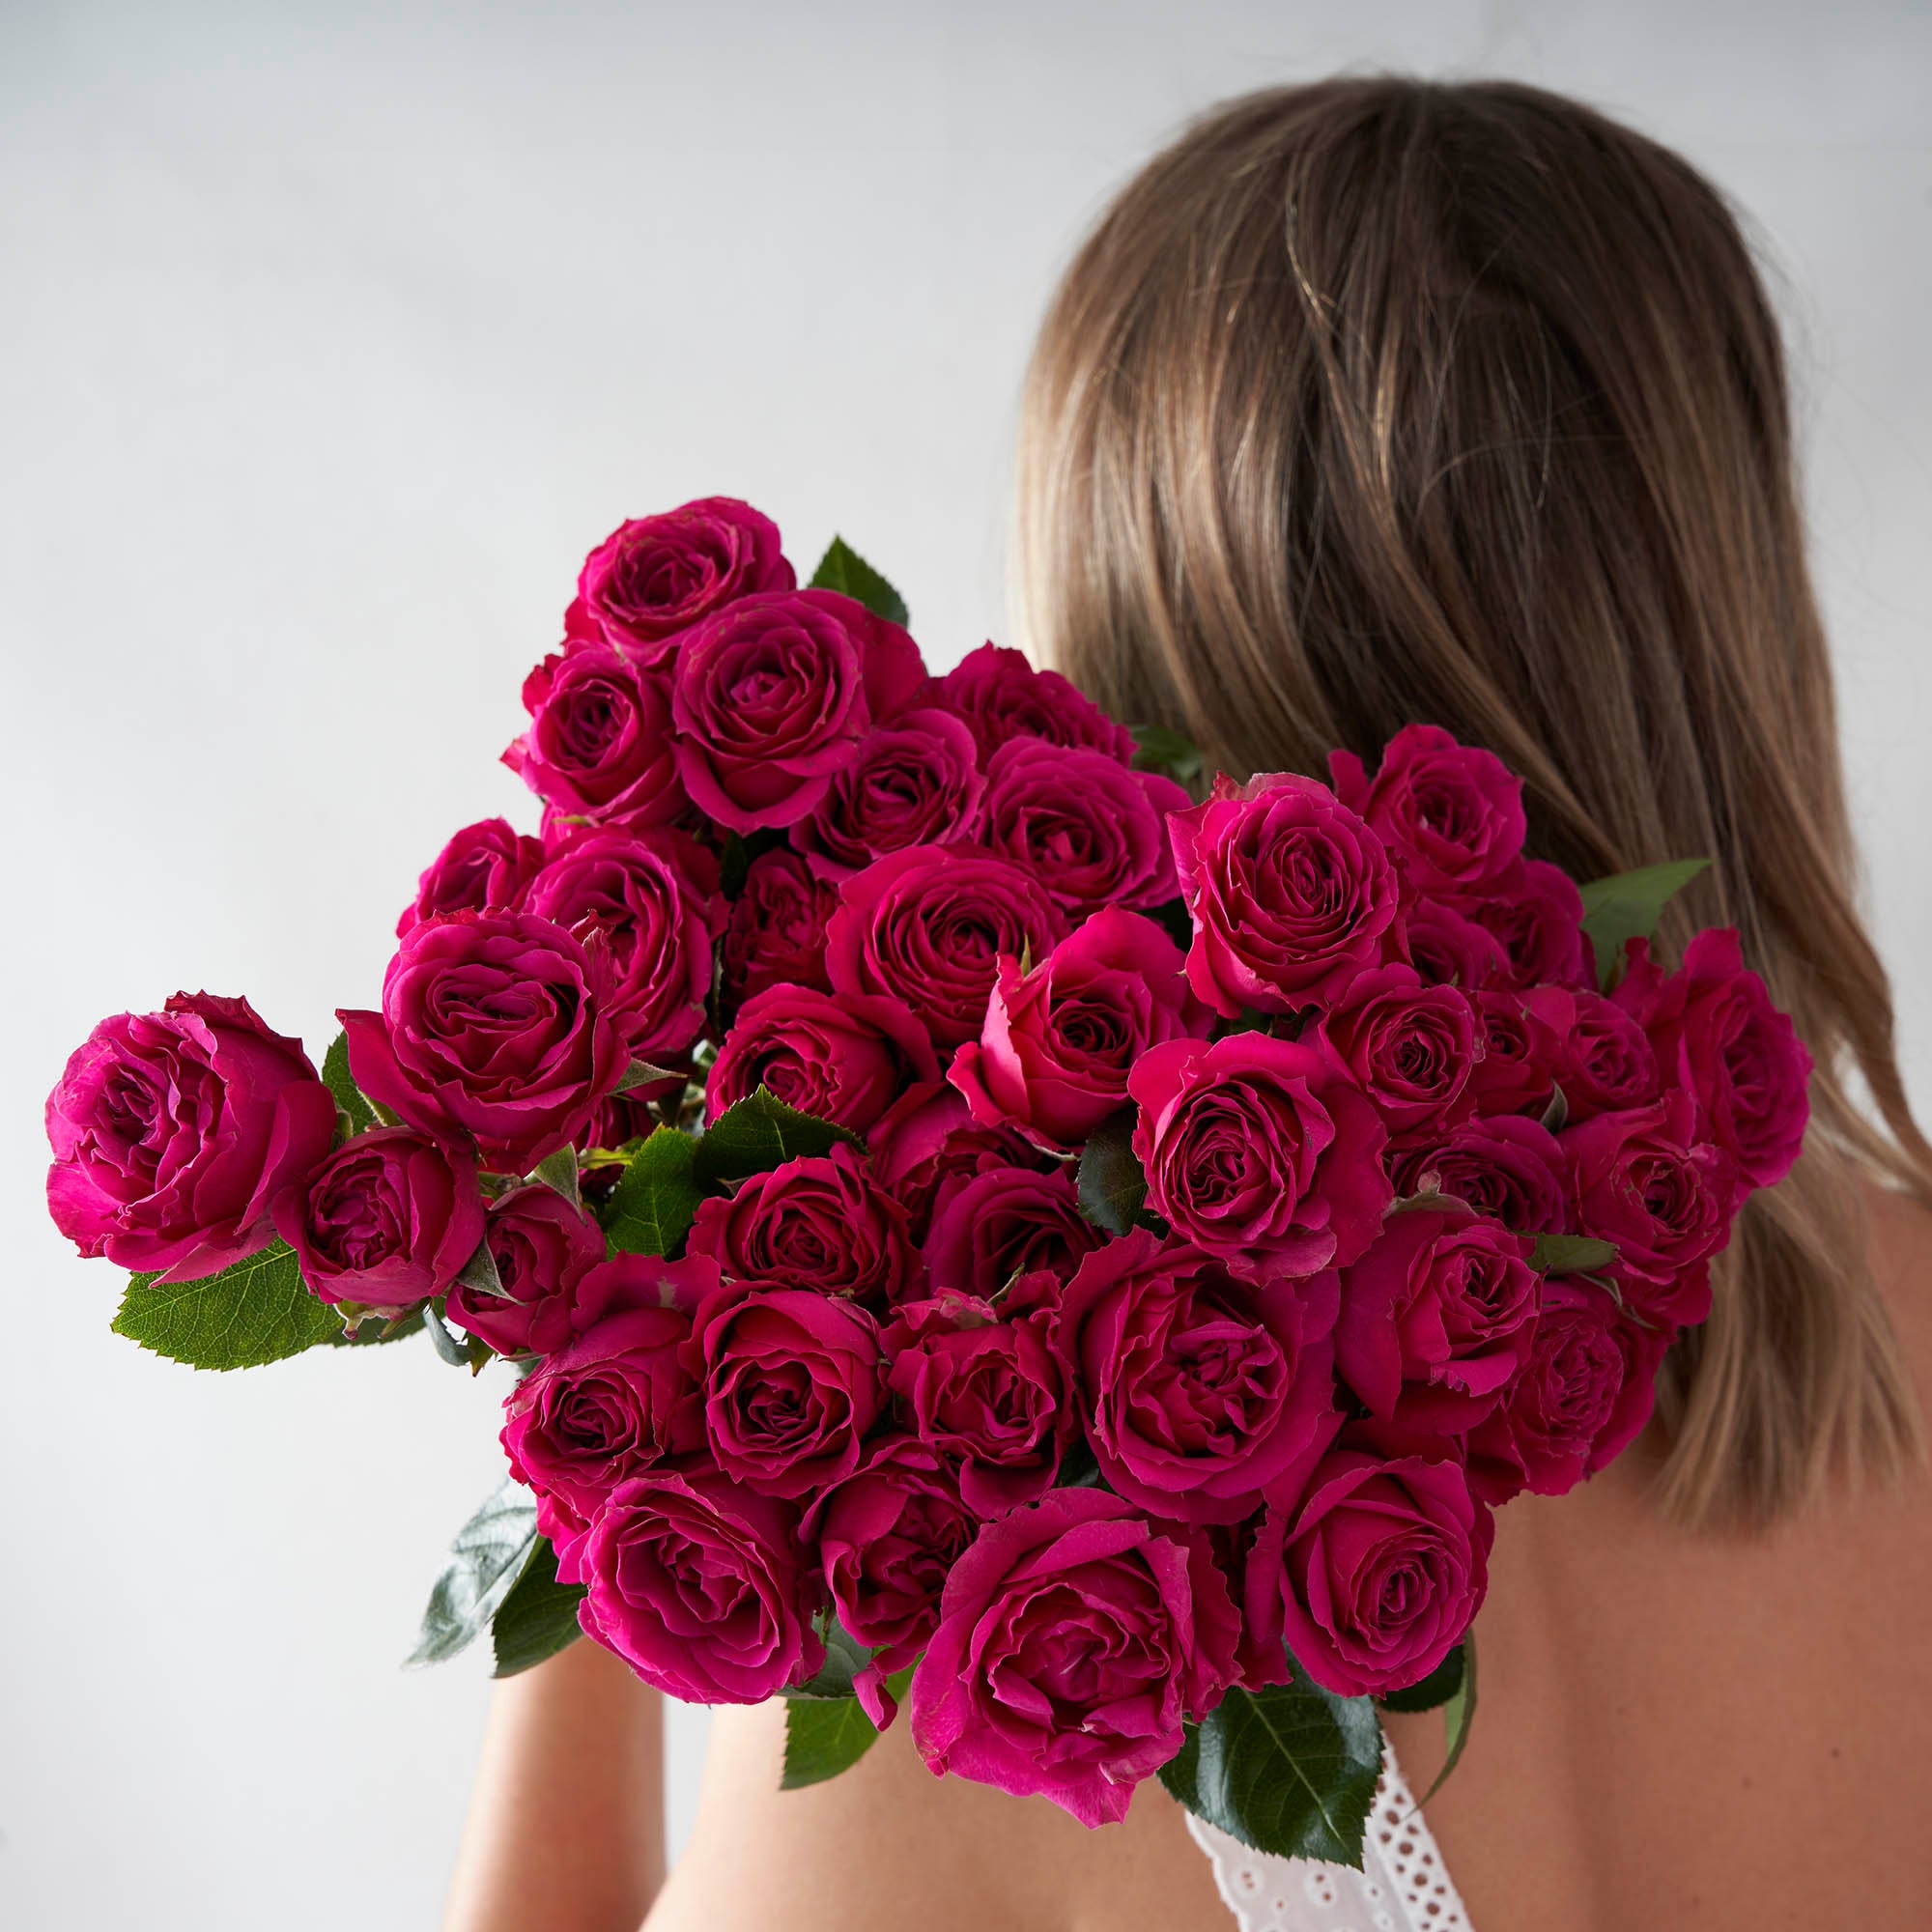 Woman holding bouquet of fuchsia pink spray roses over her shoulder.